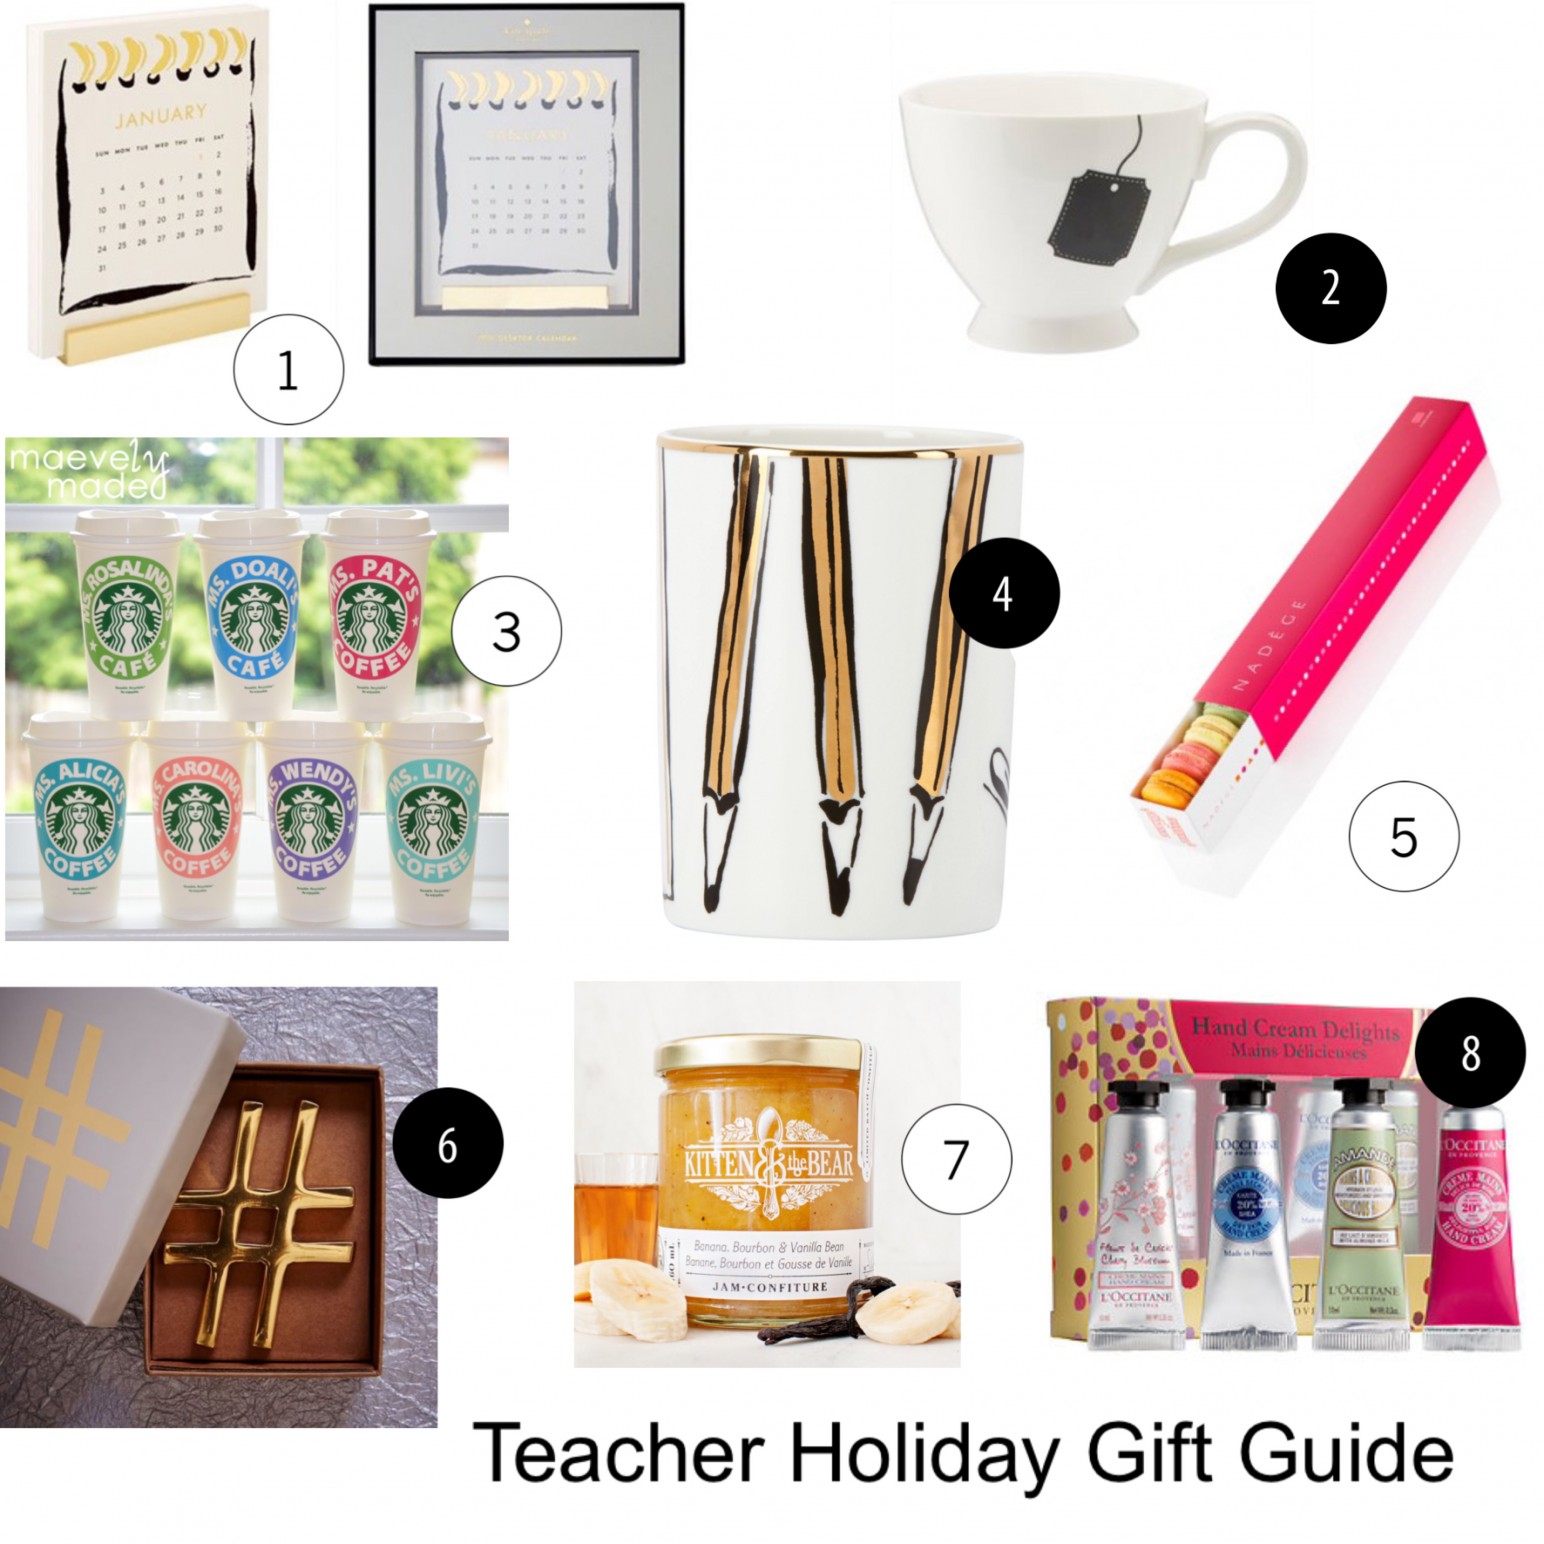 Teacher Holiday Gift Guide for under $30